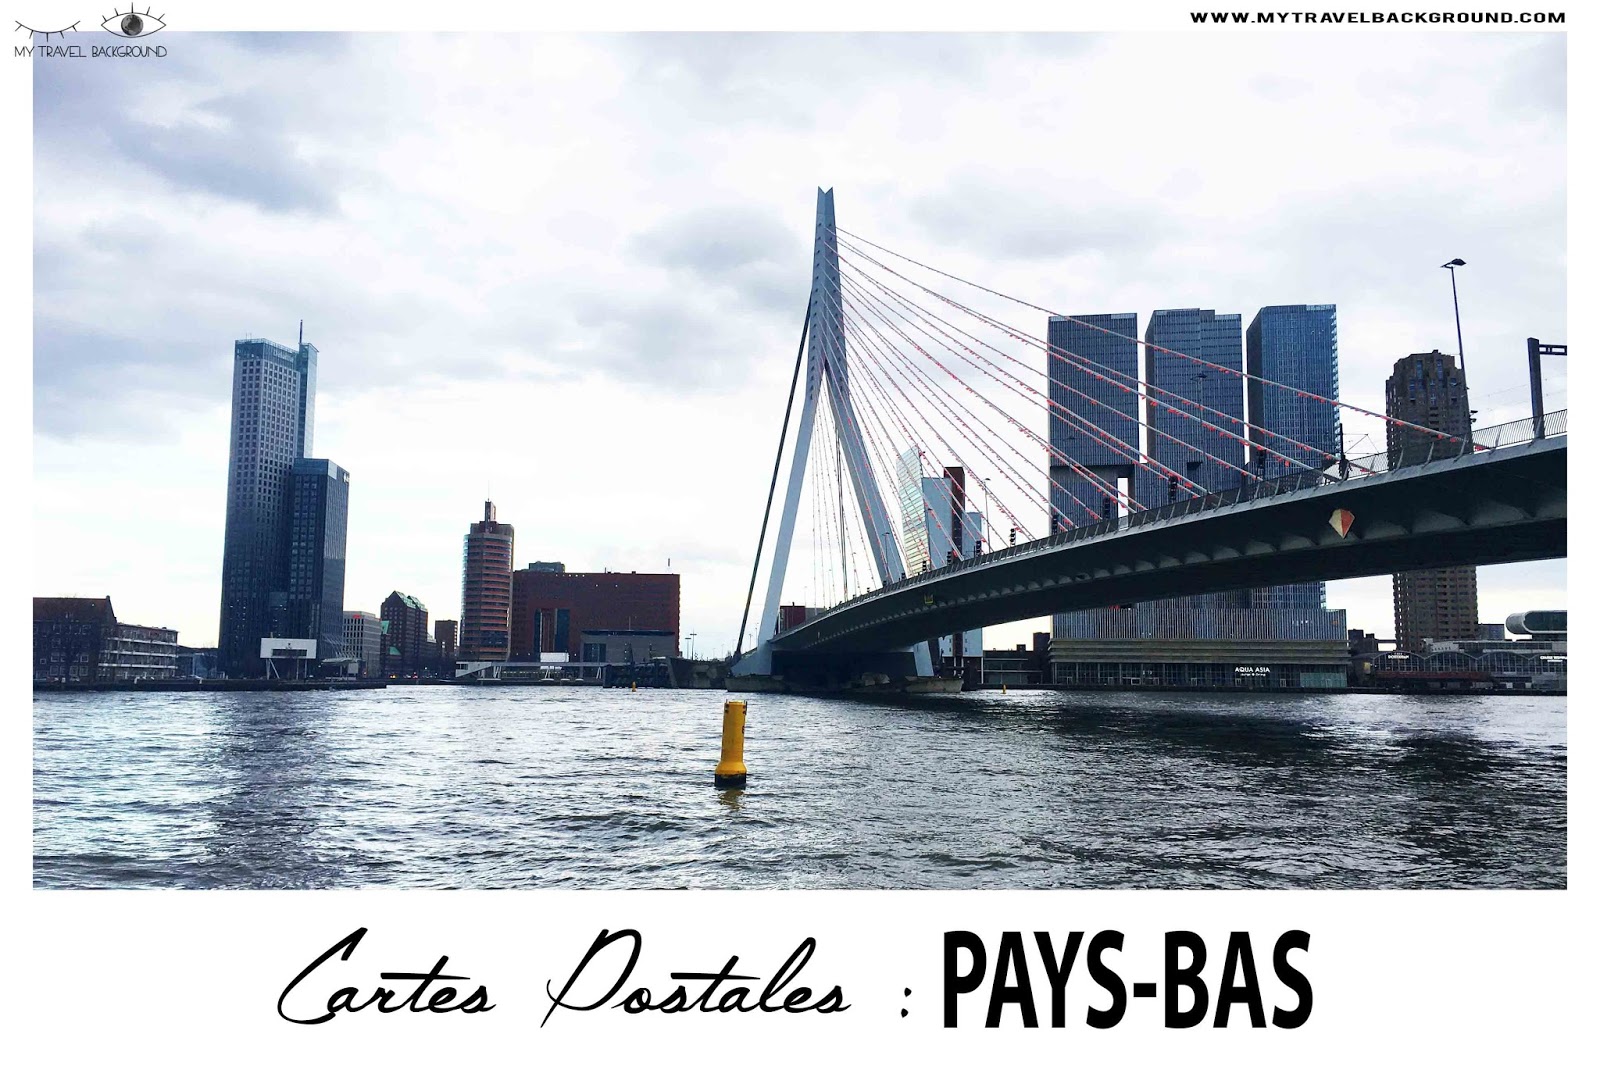 My Travel Background : Cartes Postales Pays-Bas